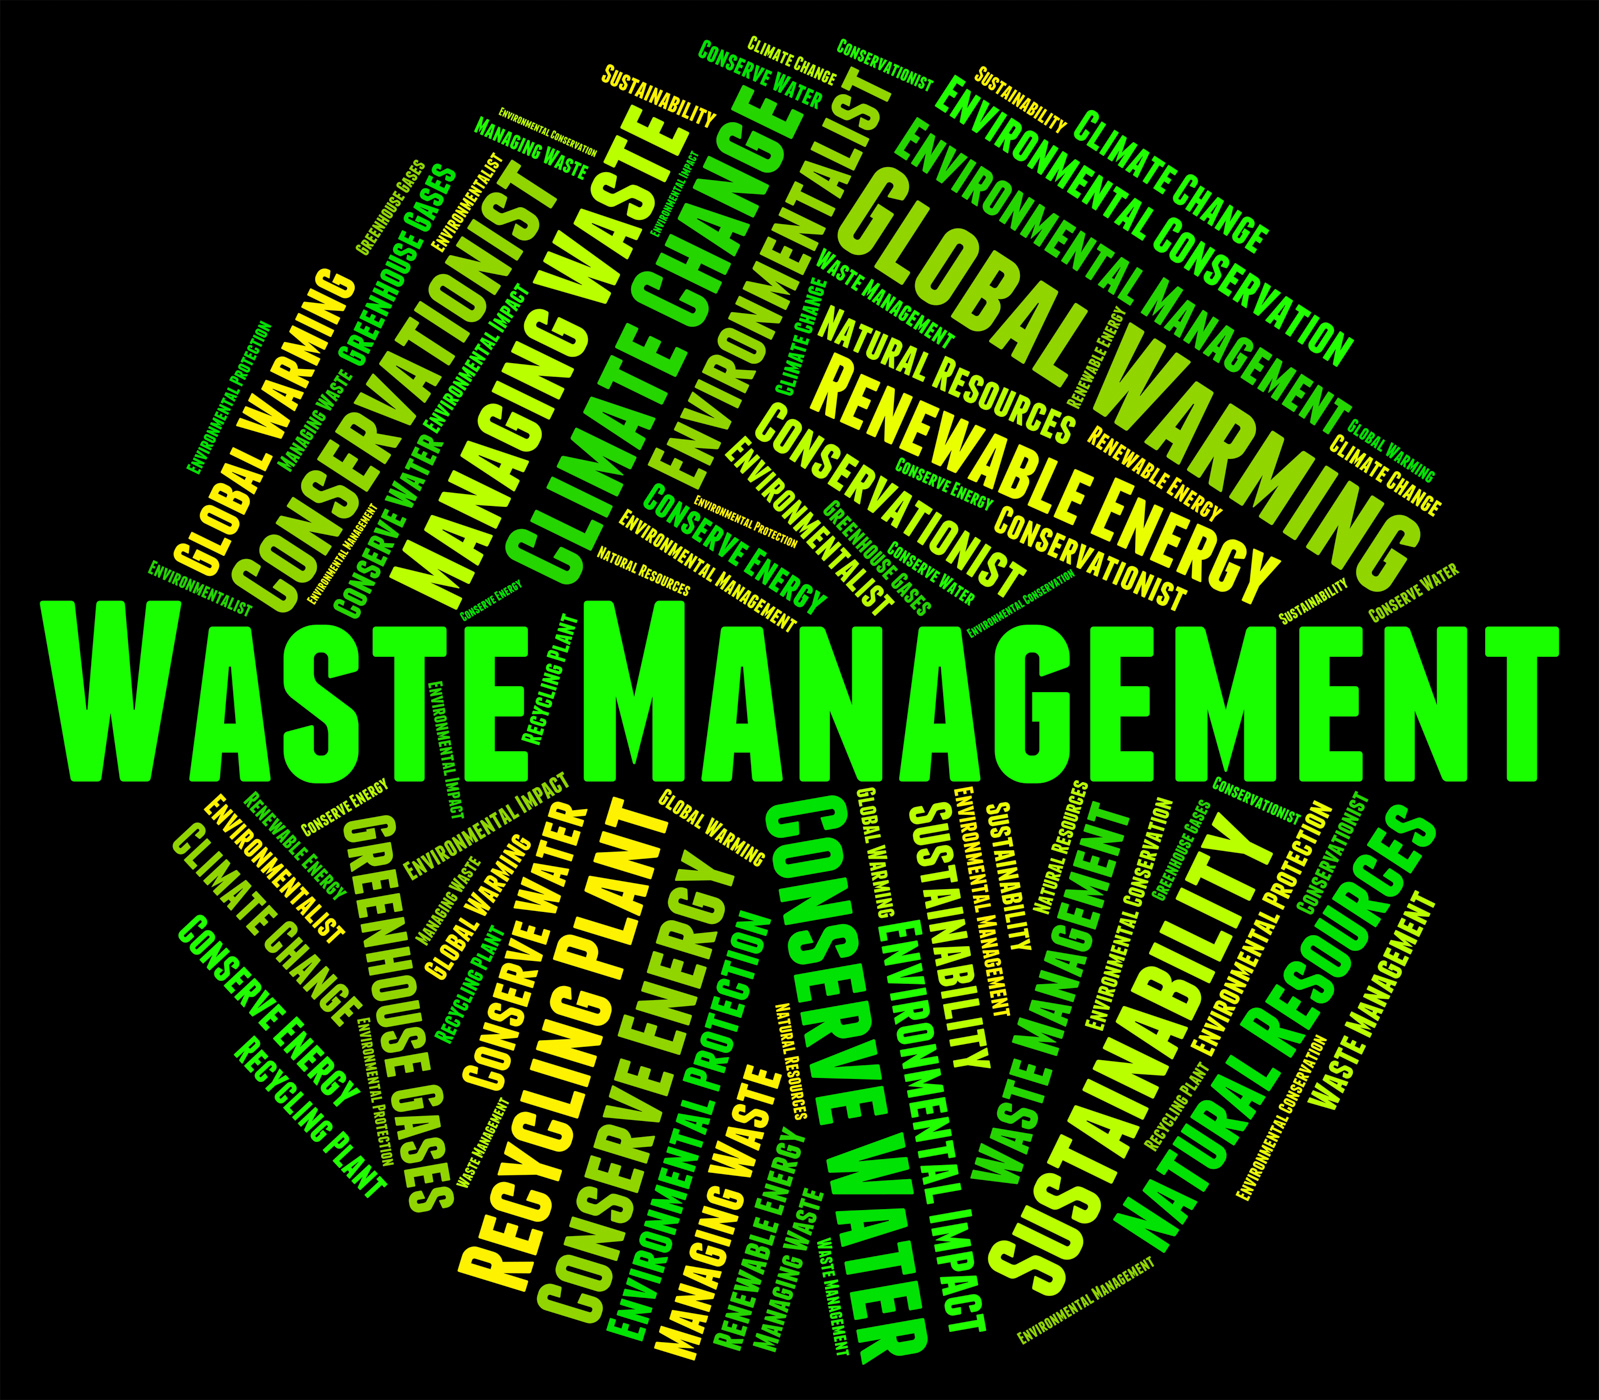 Waste management indicates get rid and collection photo